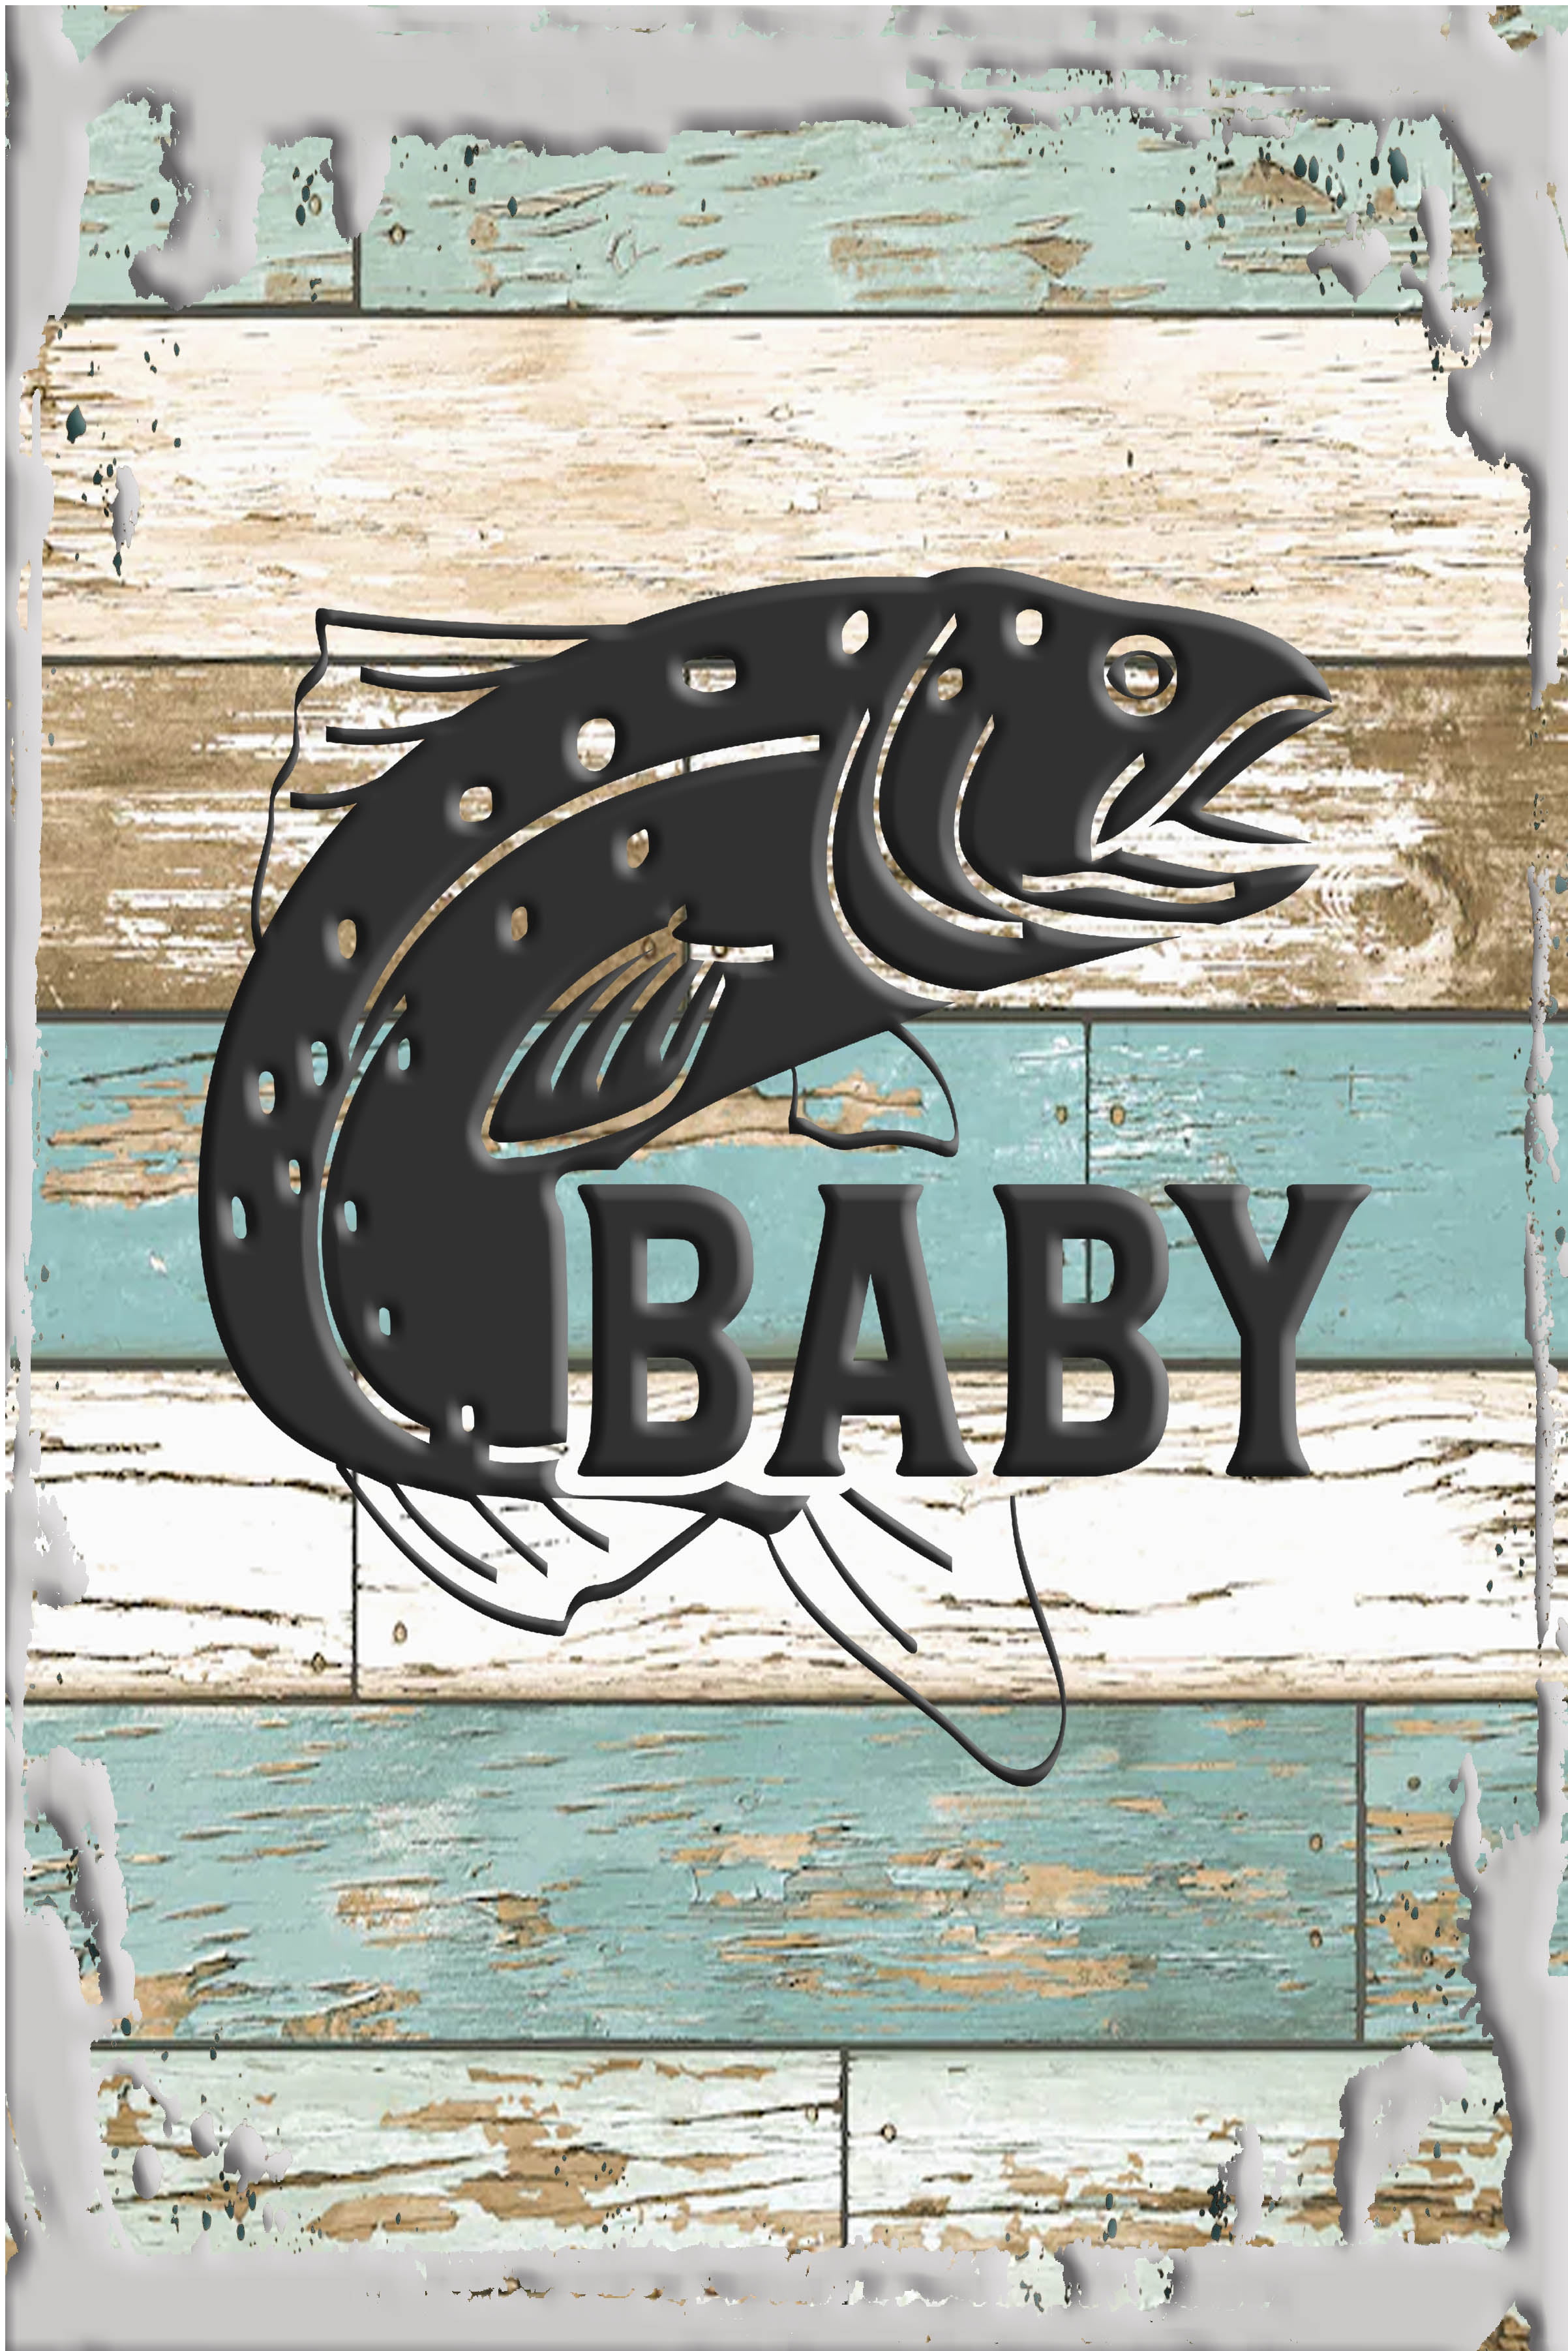 Trout baby child fisherman fishing family river fish White Wall Art Decor  Funny Gift 